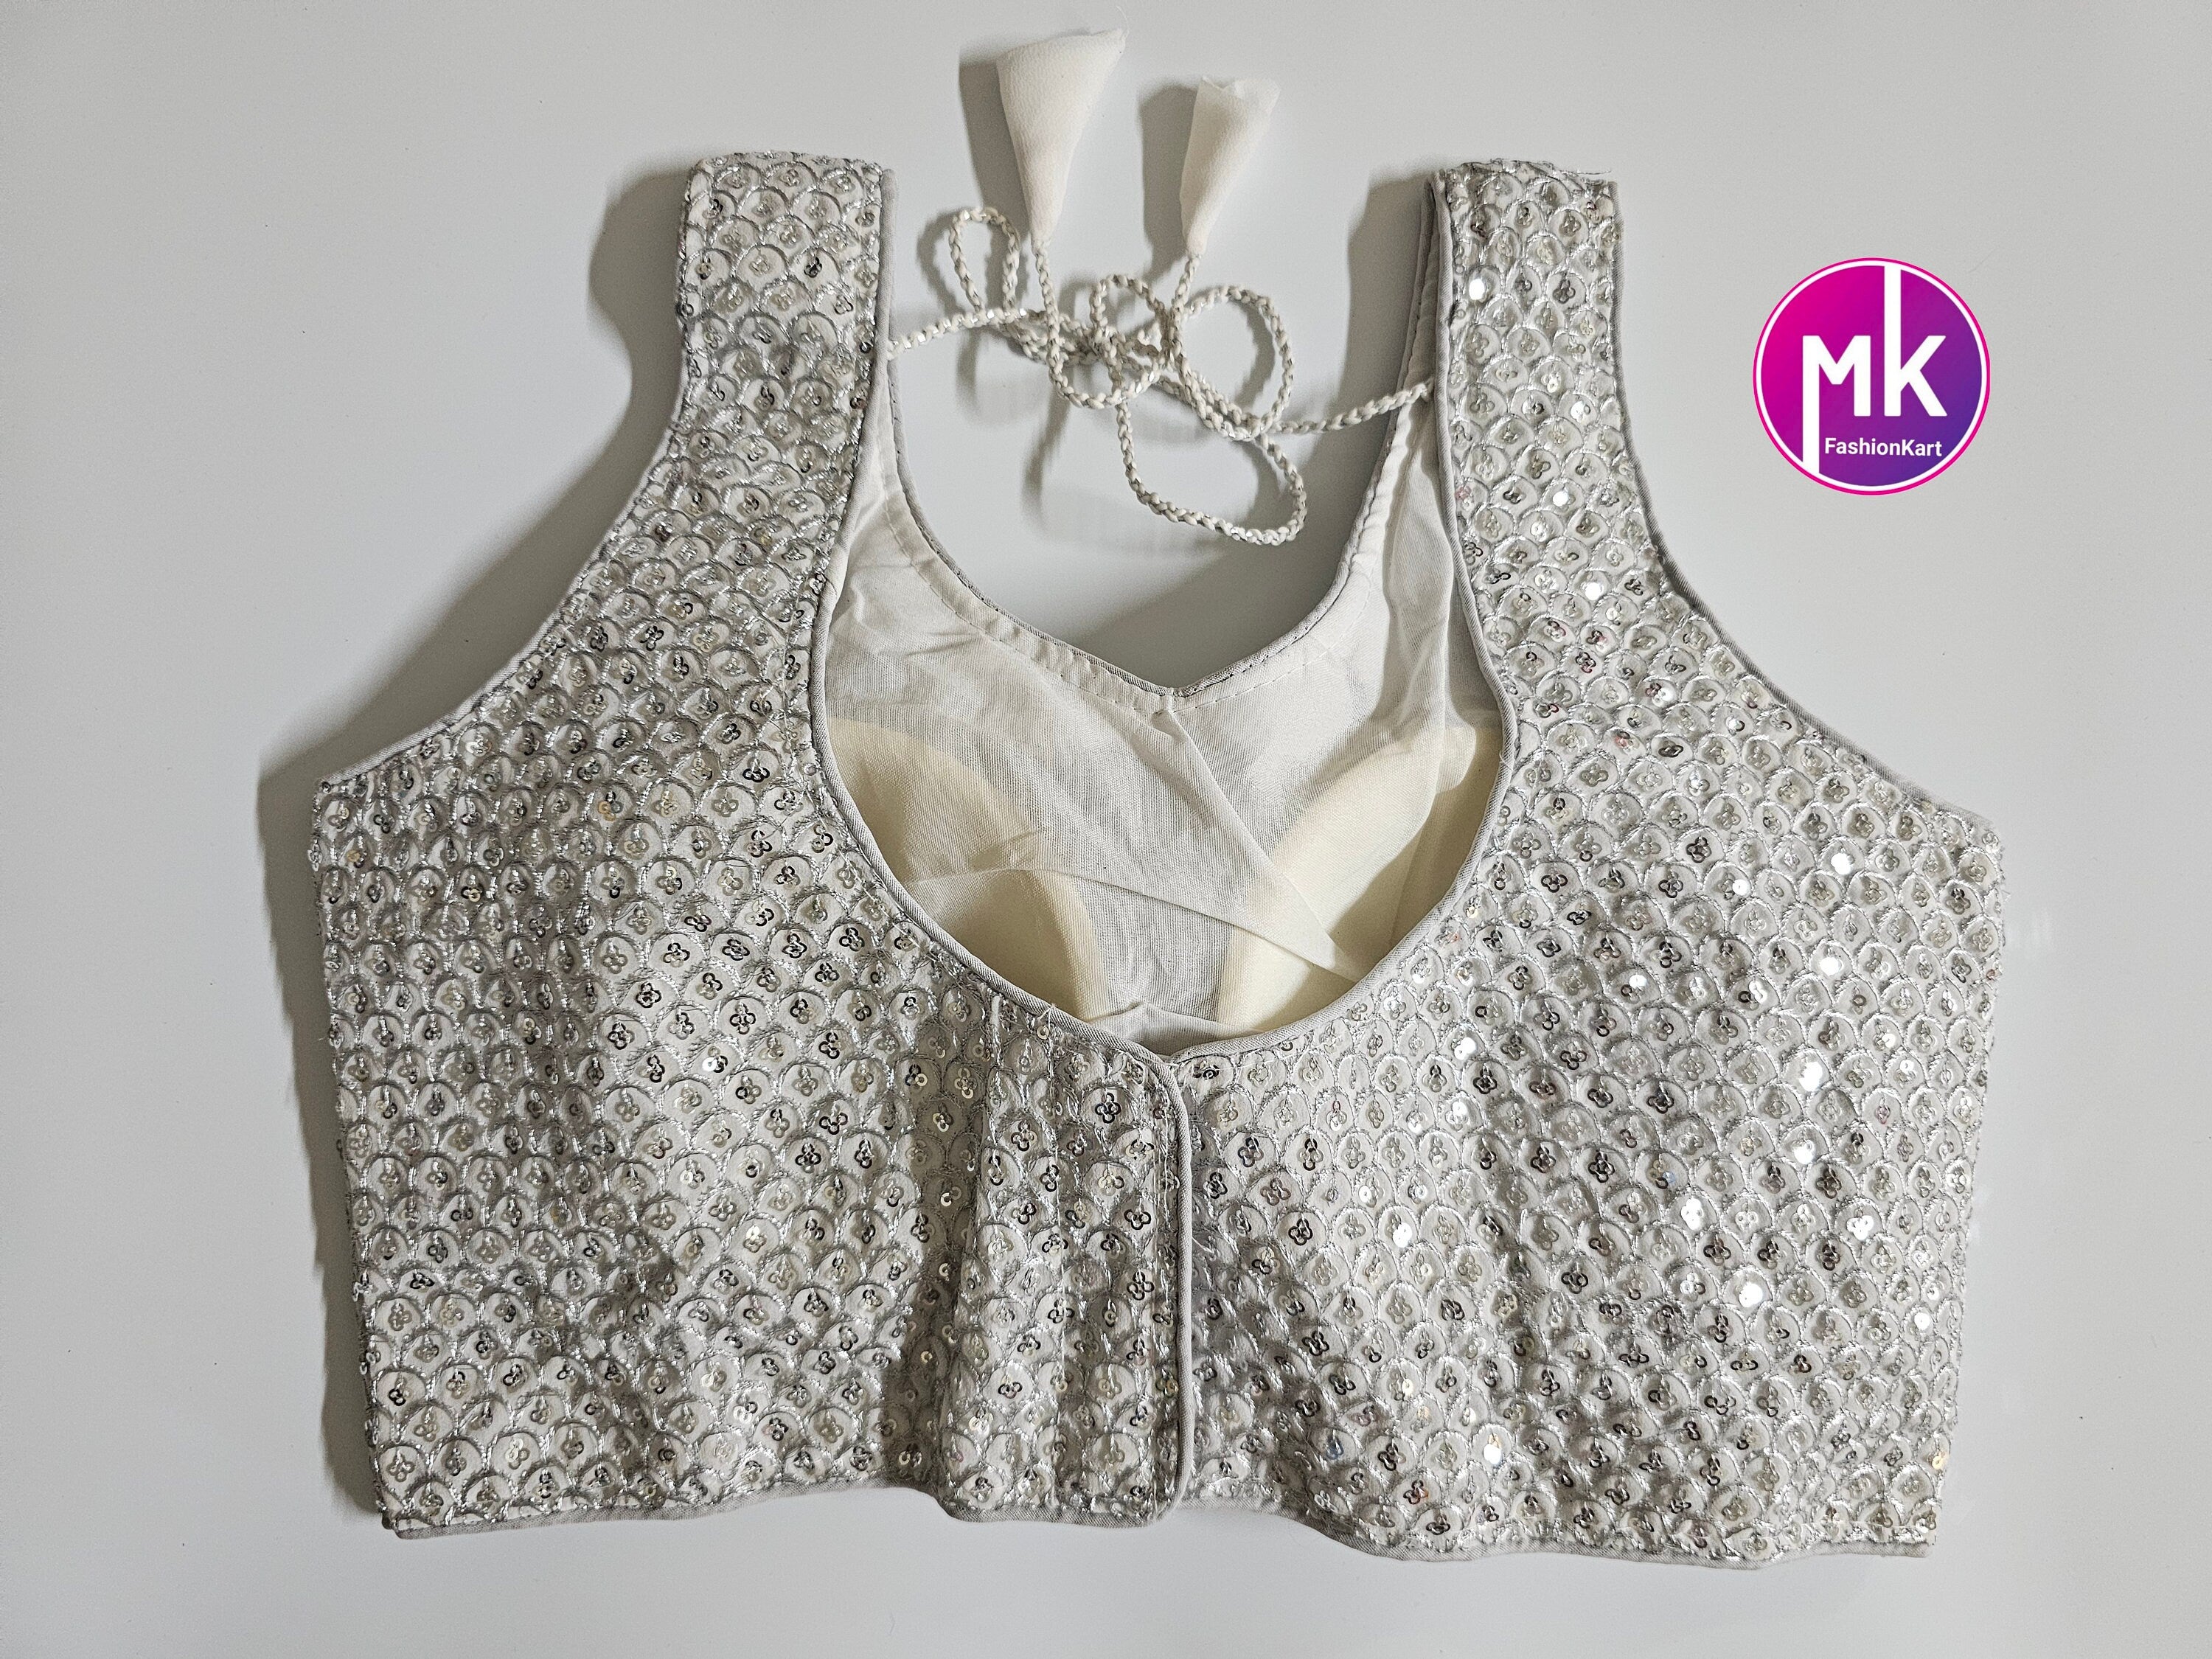 Readymade Saree Blouse - Sleeveless blouse - Silver Color blouse with sequence work - Princess cut padded - size 34" (Upto 36")